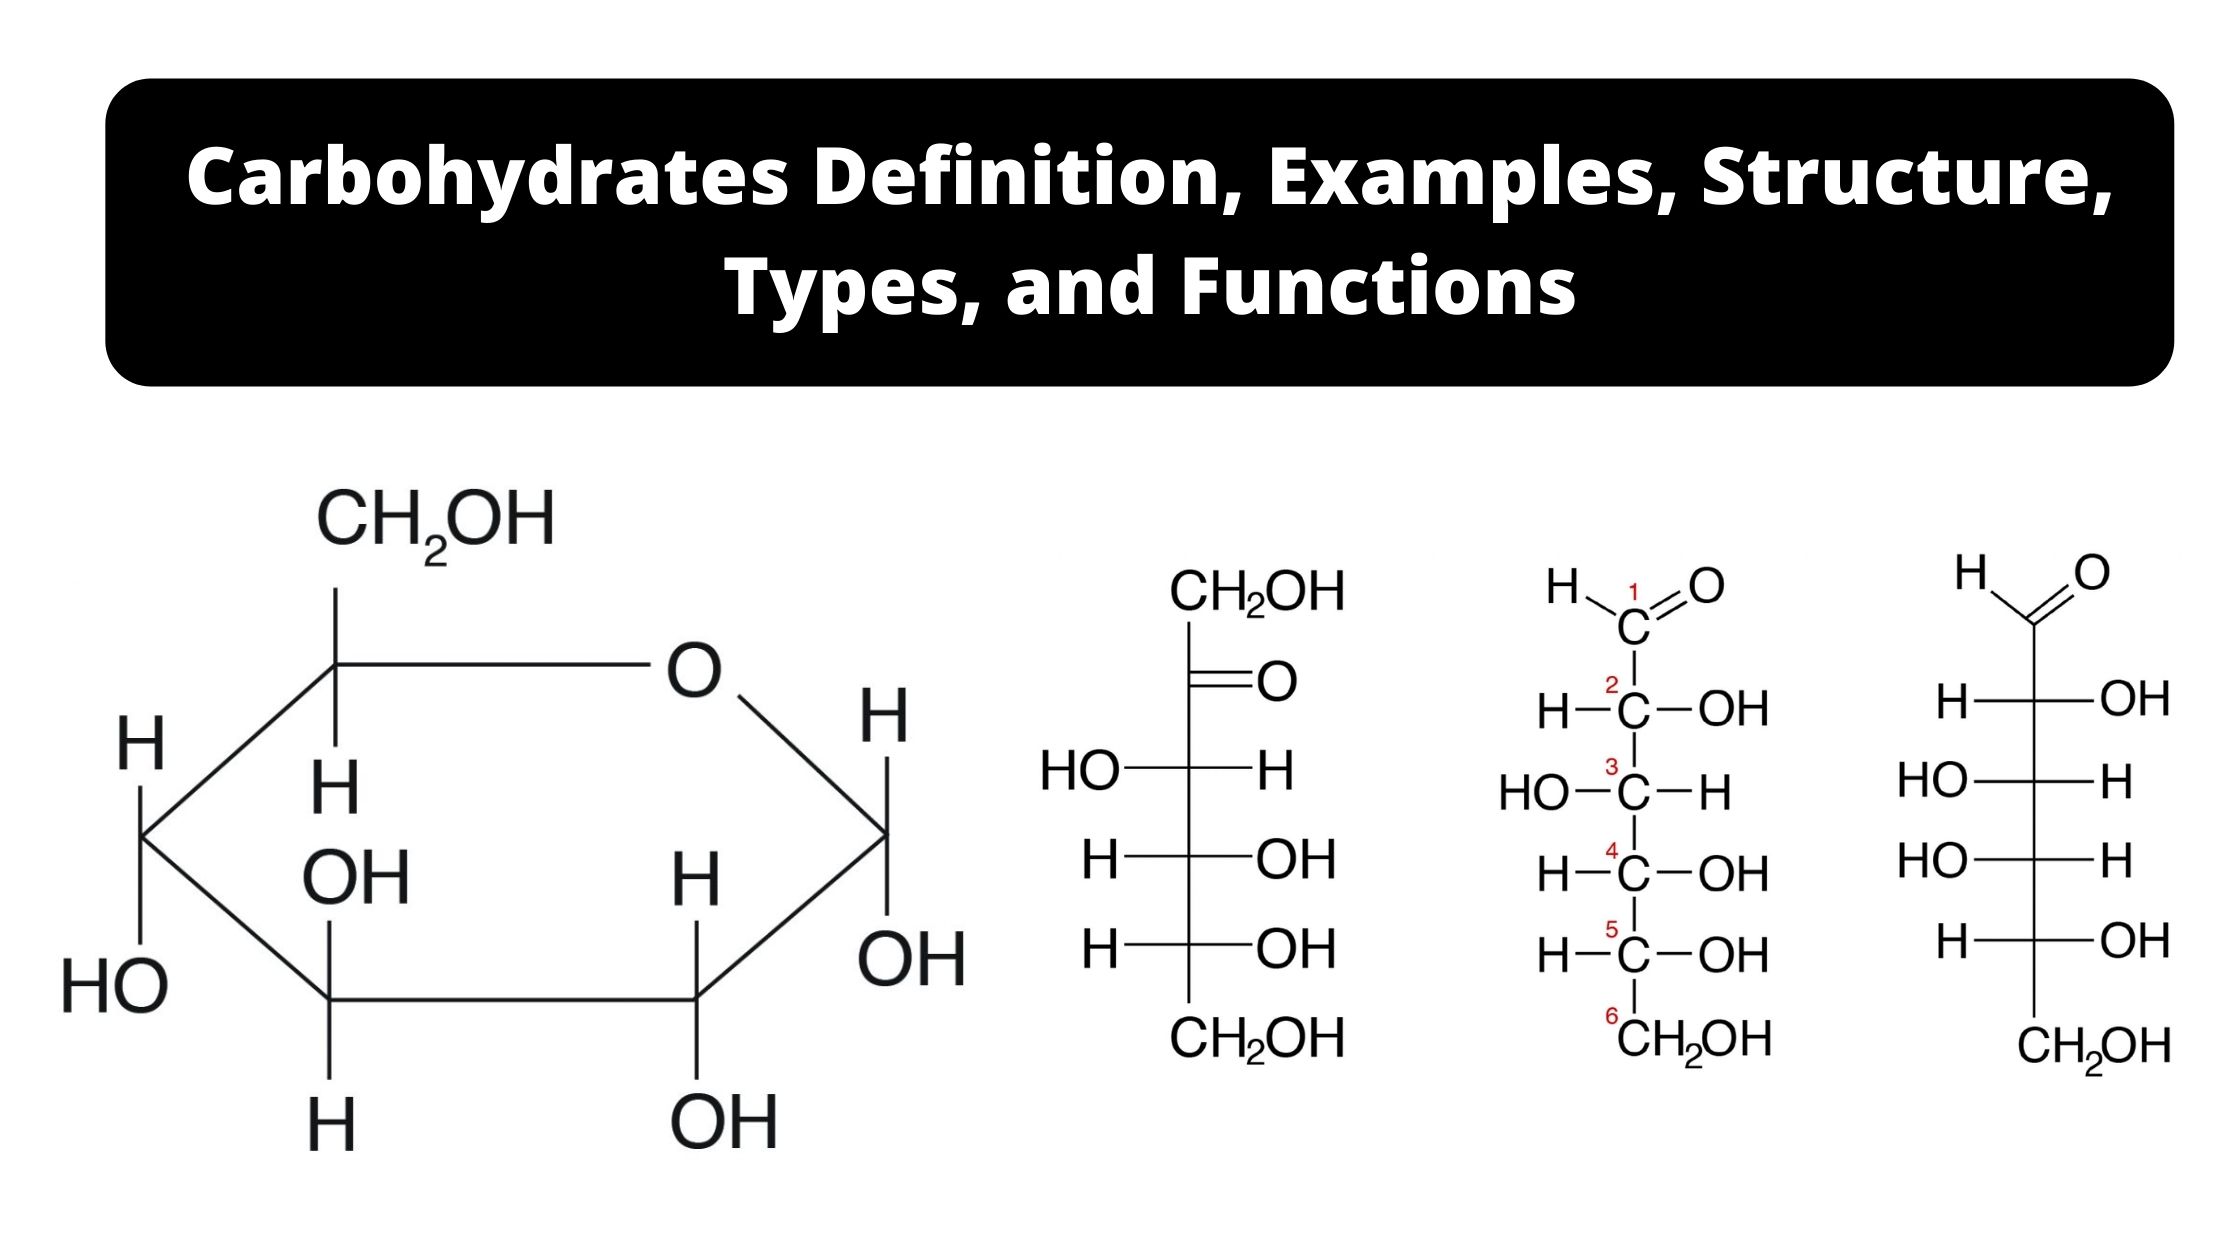 Carbohydrates Definition, Examples, Structure, Types, and Functions